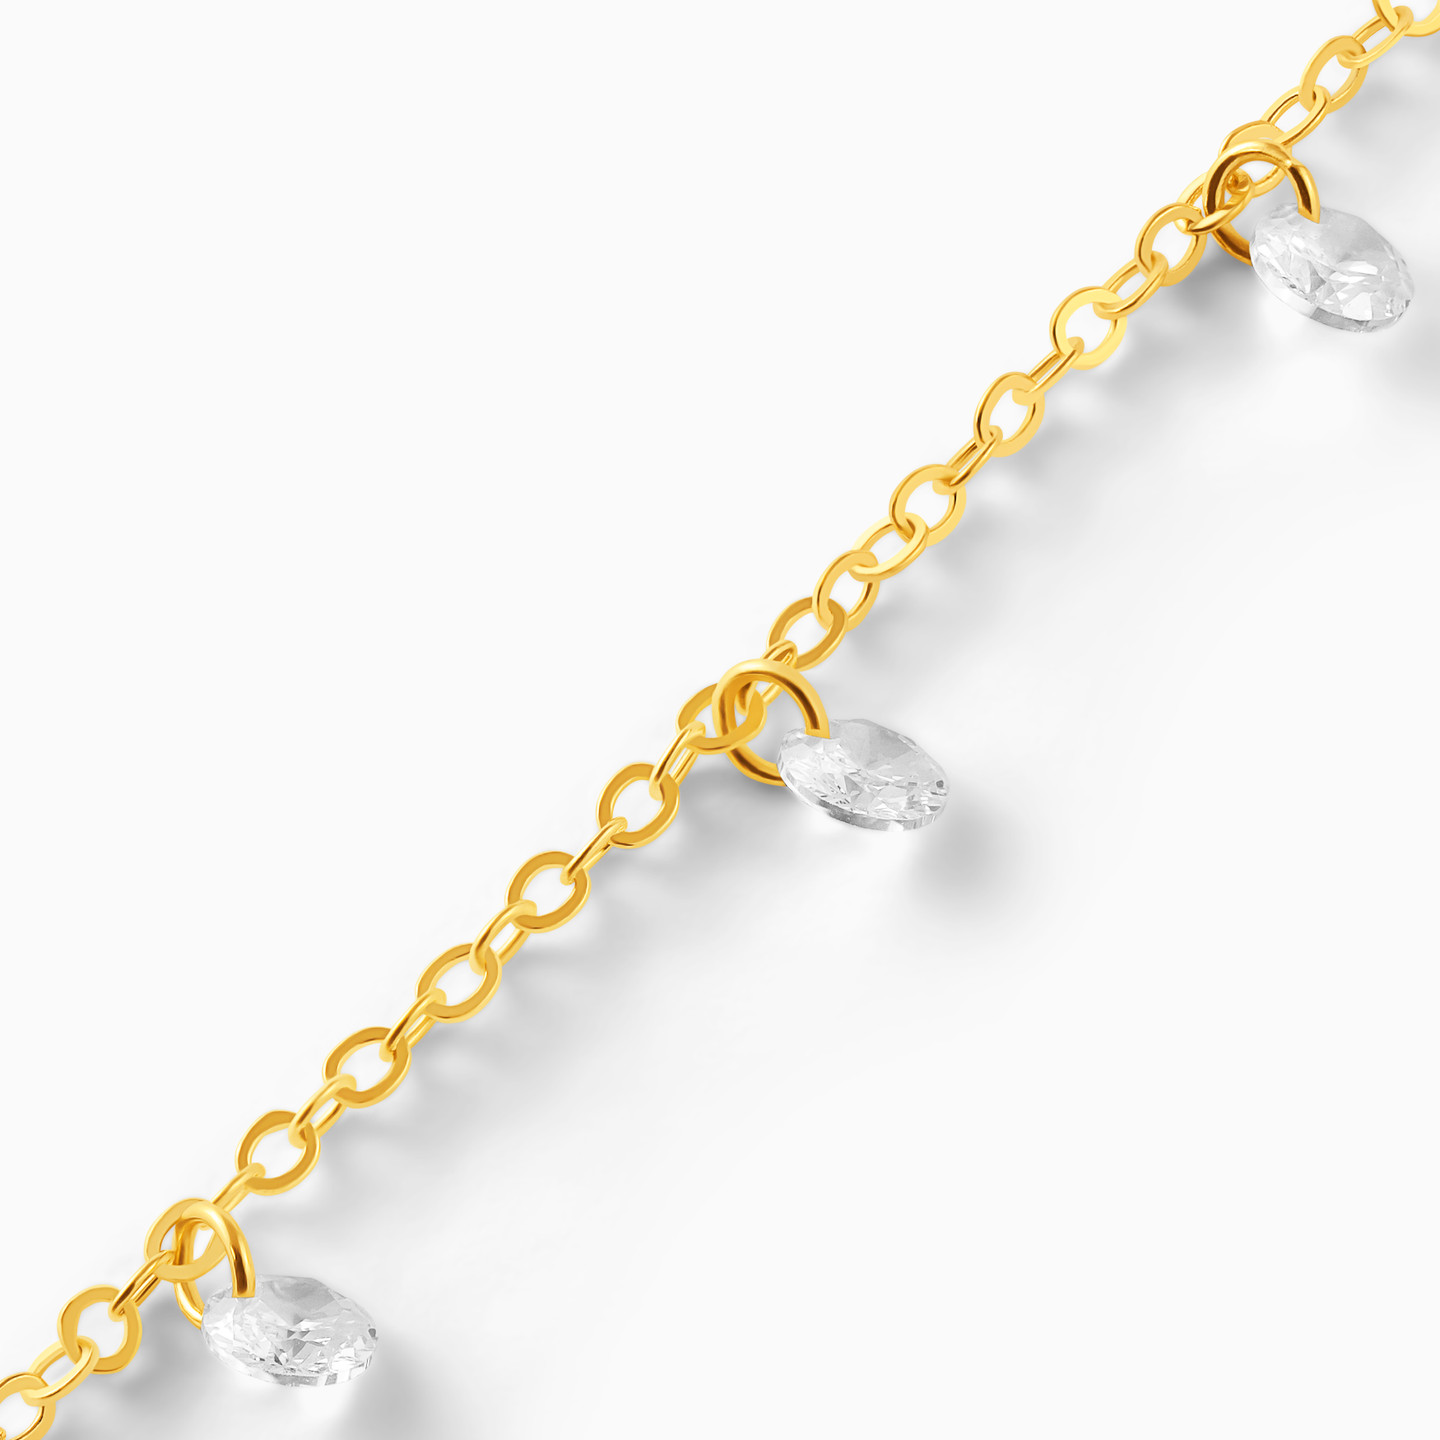 Gold Plated Cubic Zirconia Chain Bracelet - 3